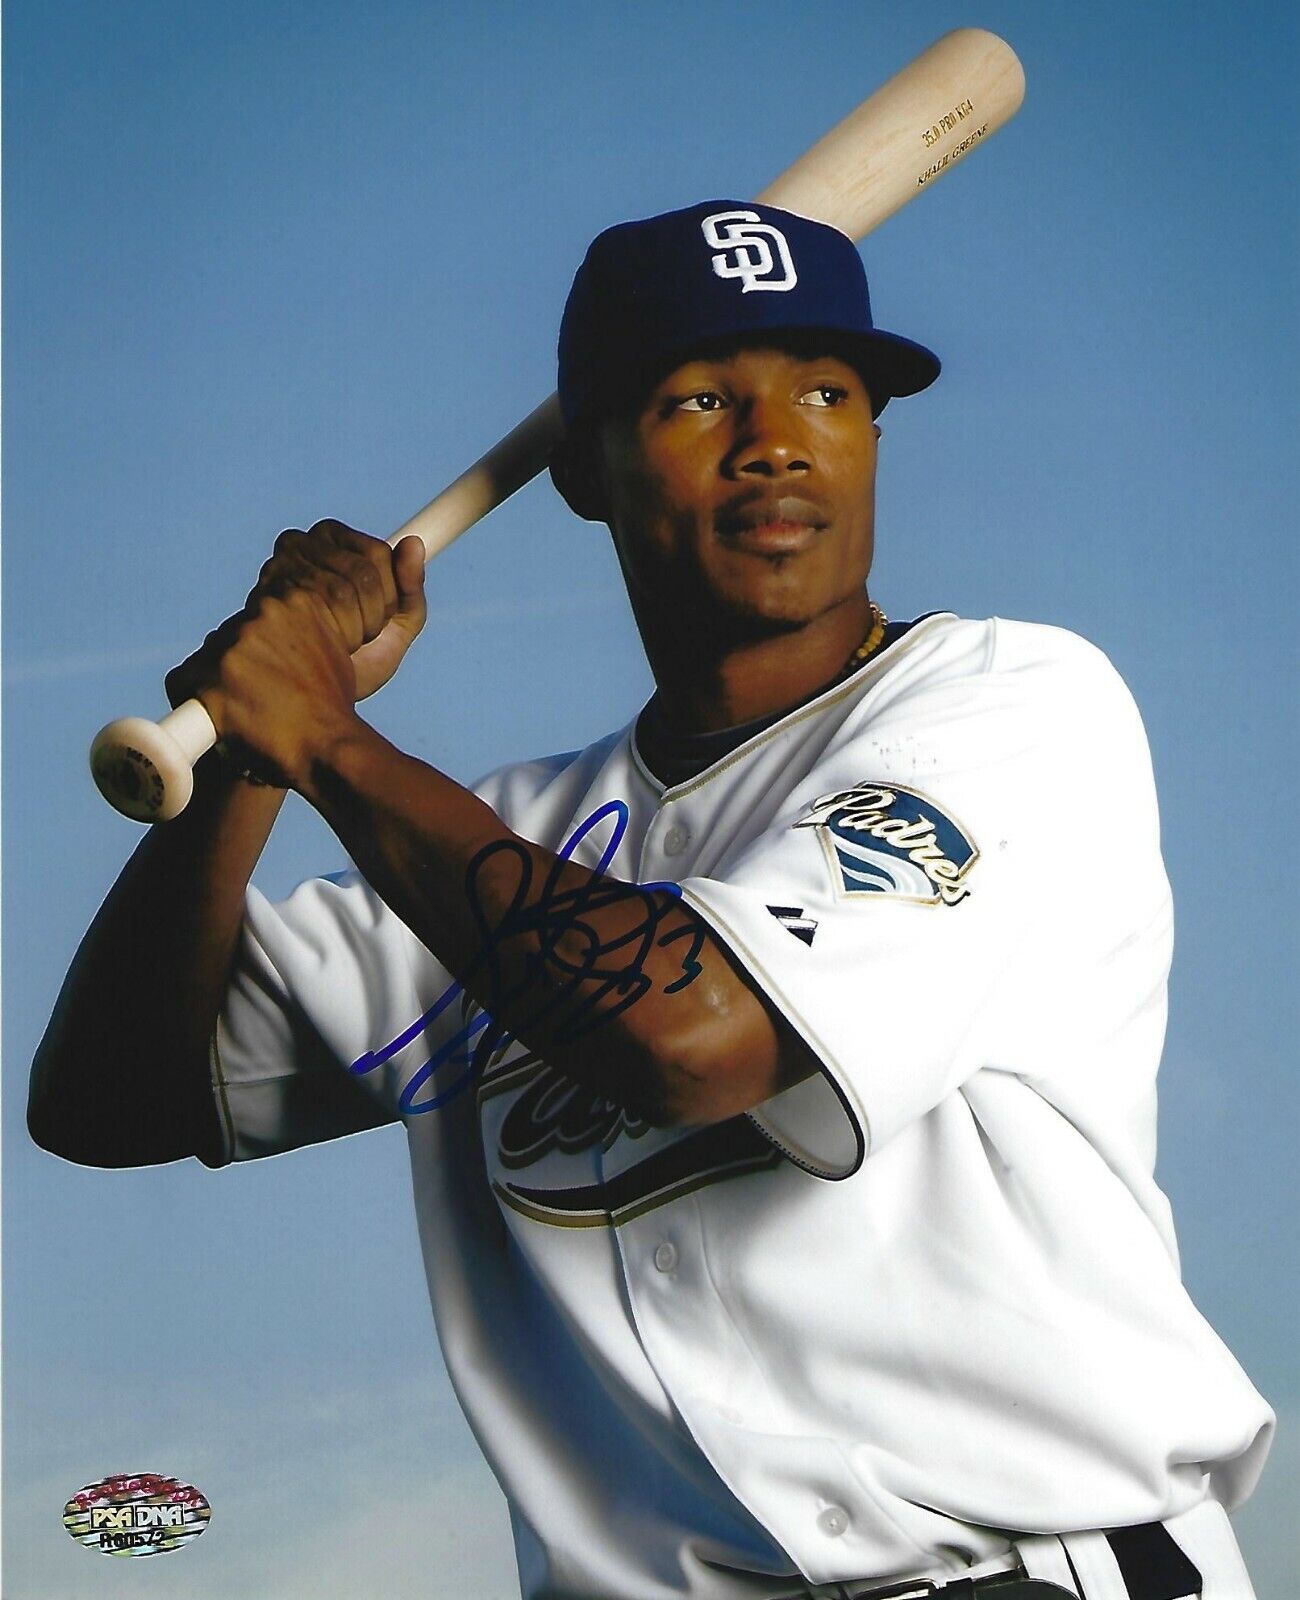 Luis Durango Signed 8x10 Photo Poster painting PSA/DNA Padres Baseball Rookie Picture Autograph